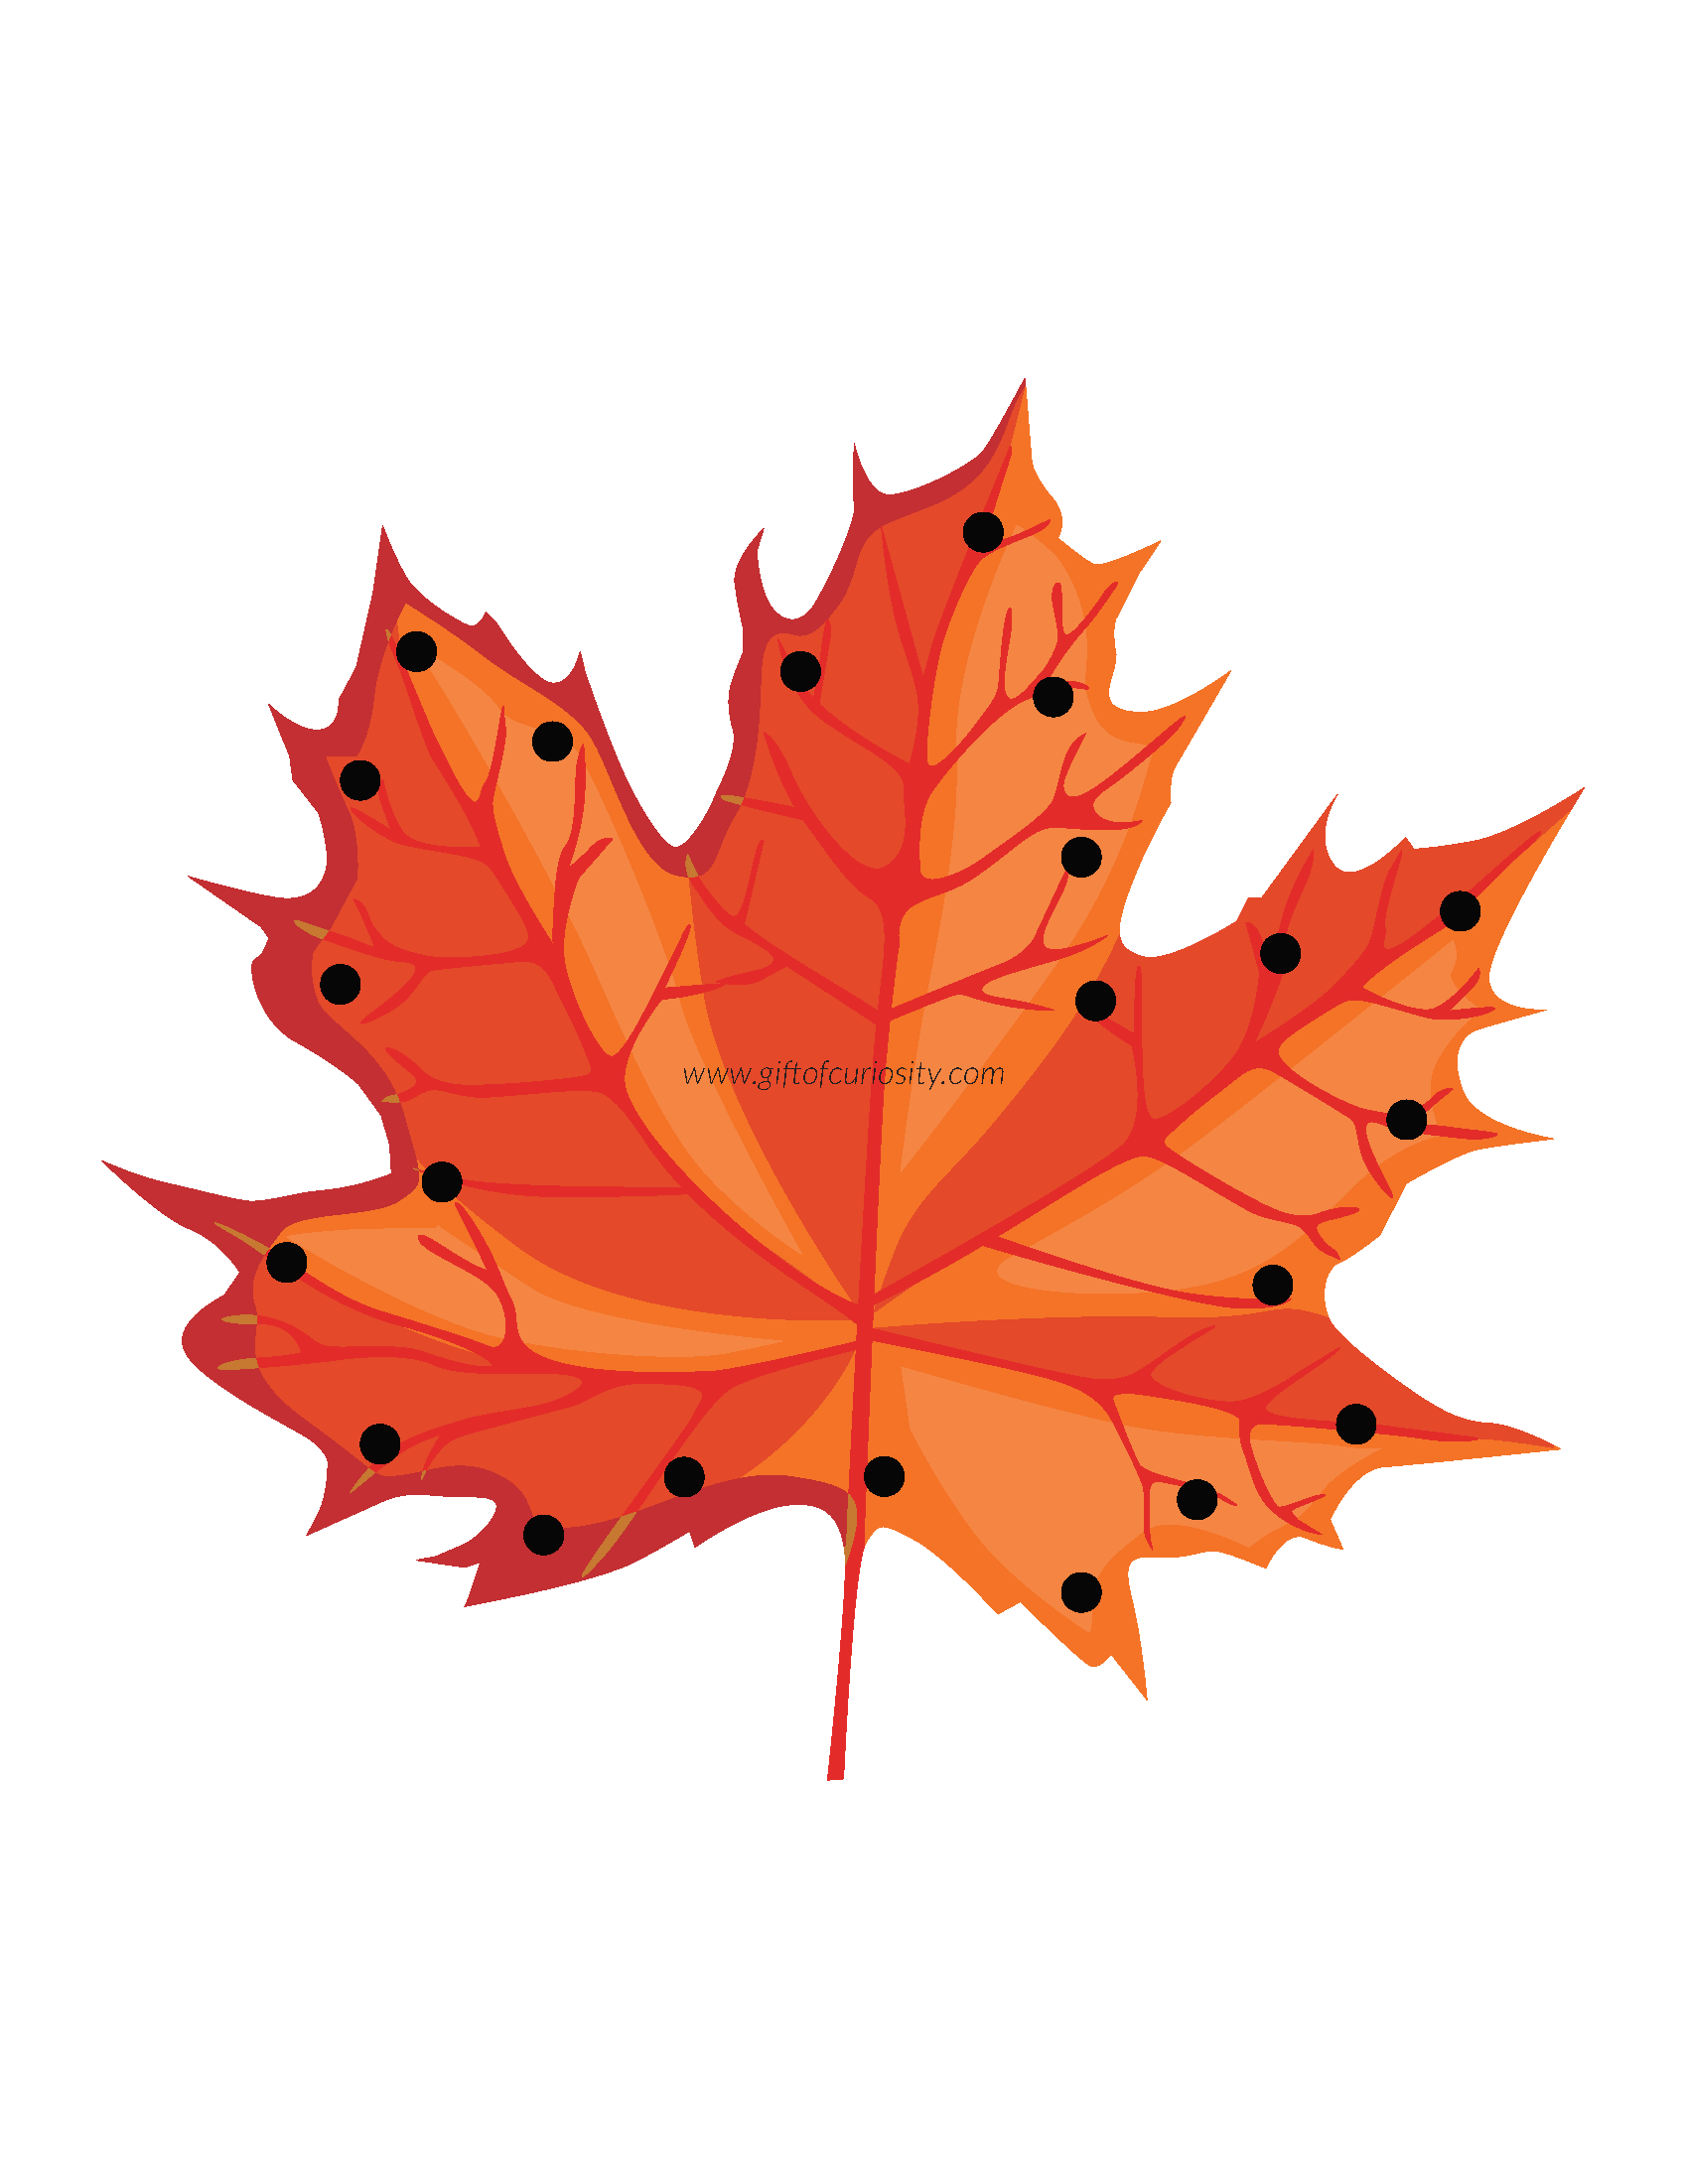 Fall Leaf Lacing Cards - Gift of Curiosity